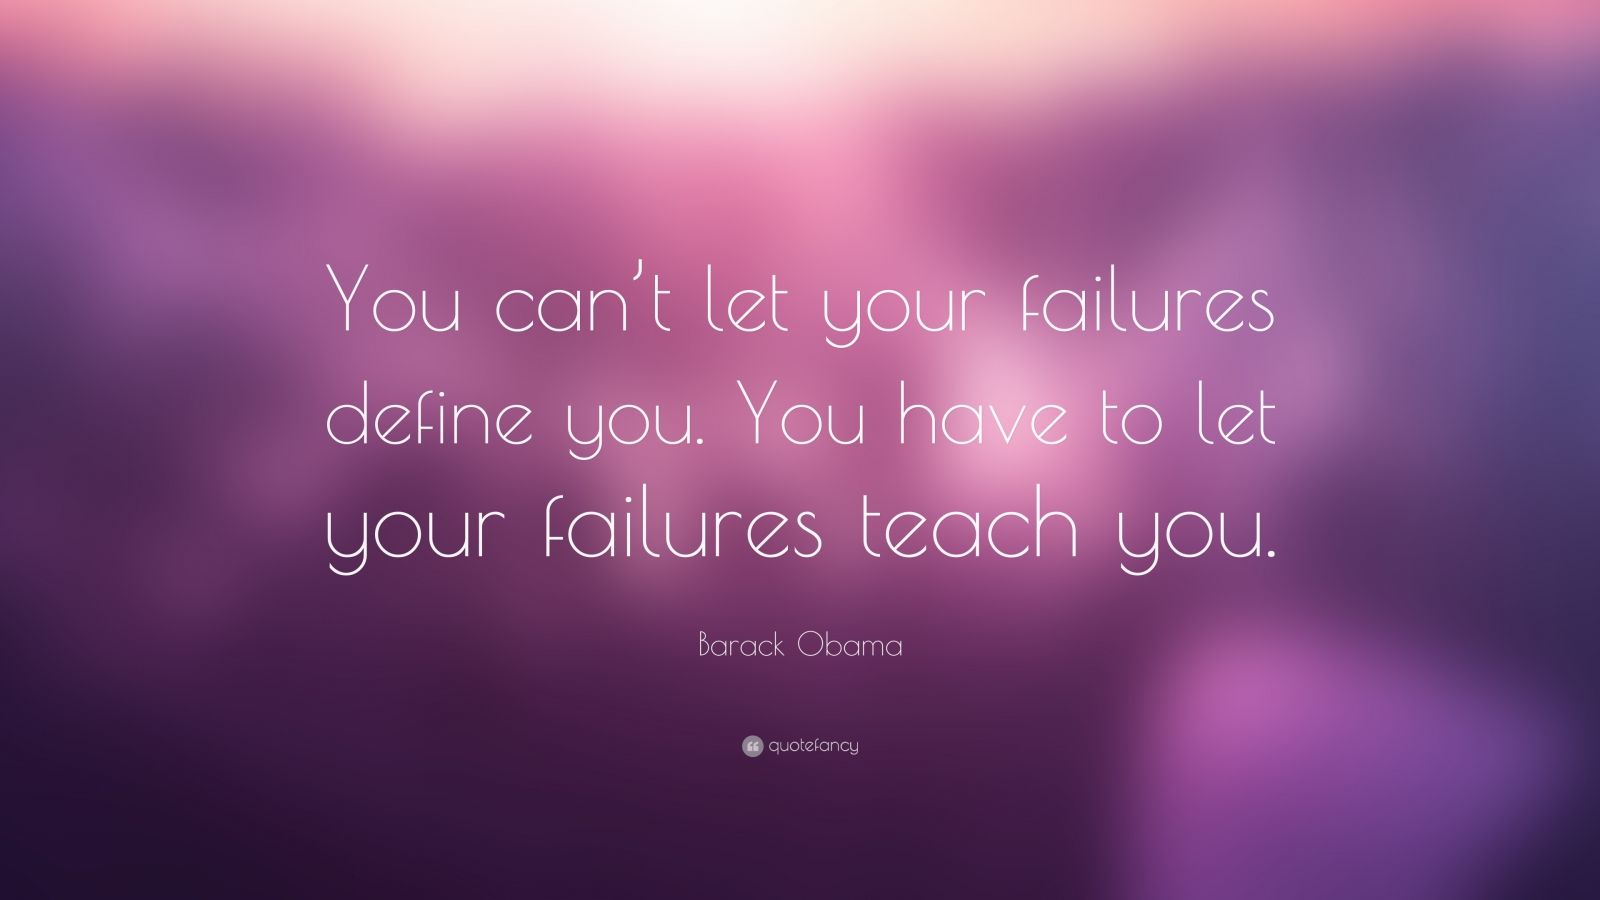 Barack Obama Quote: “You can’t let your failures define you. You have ...